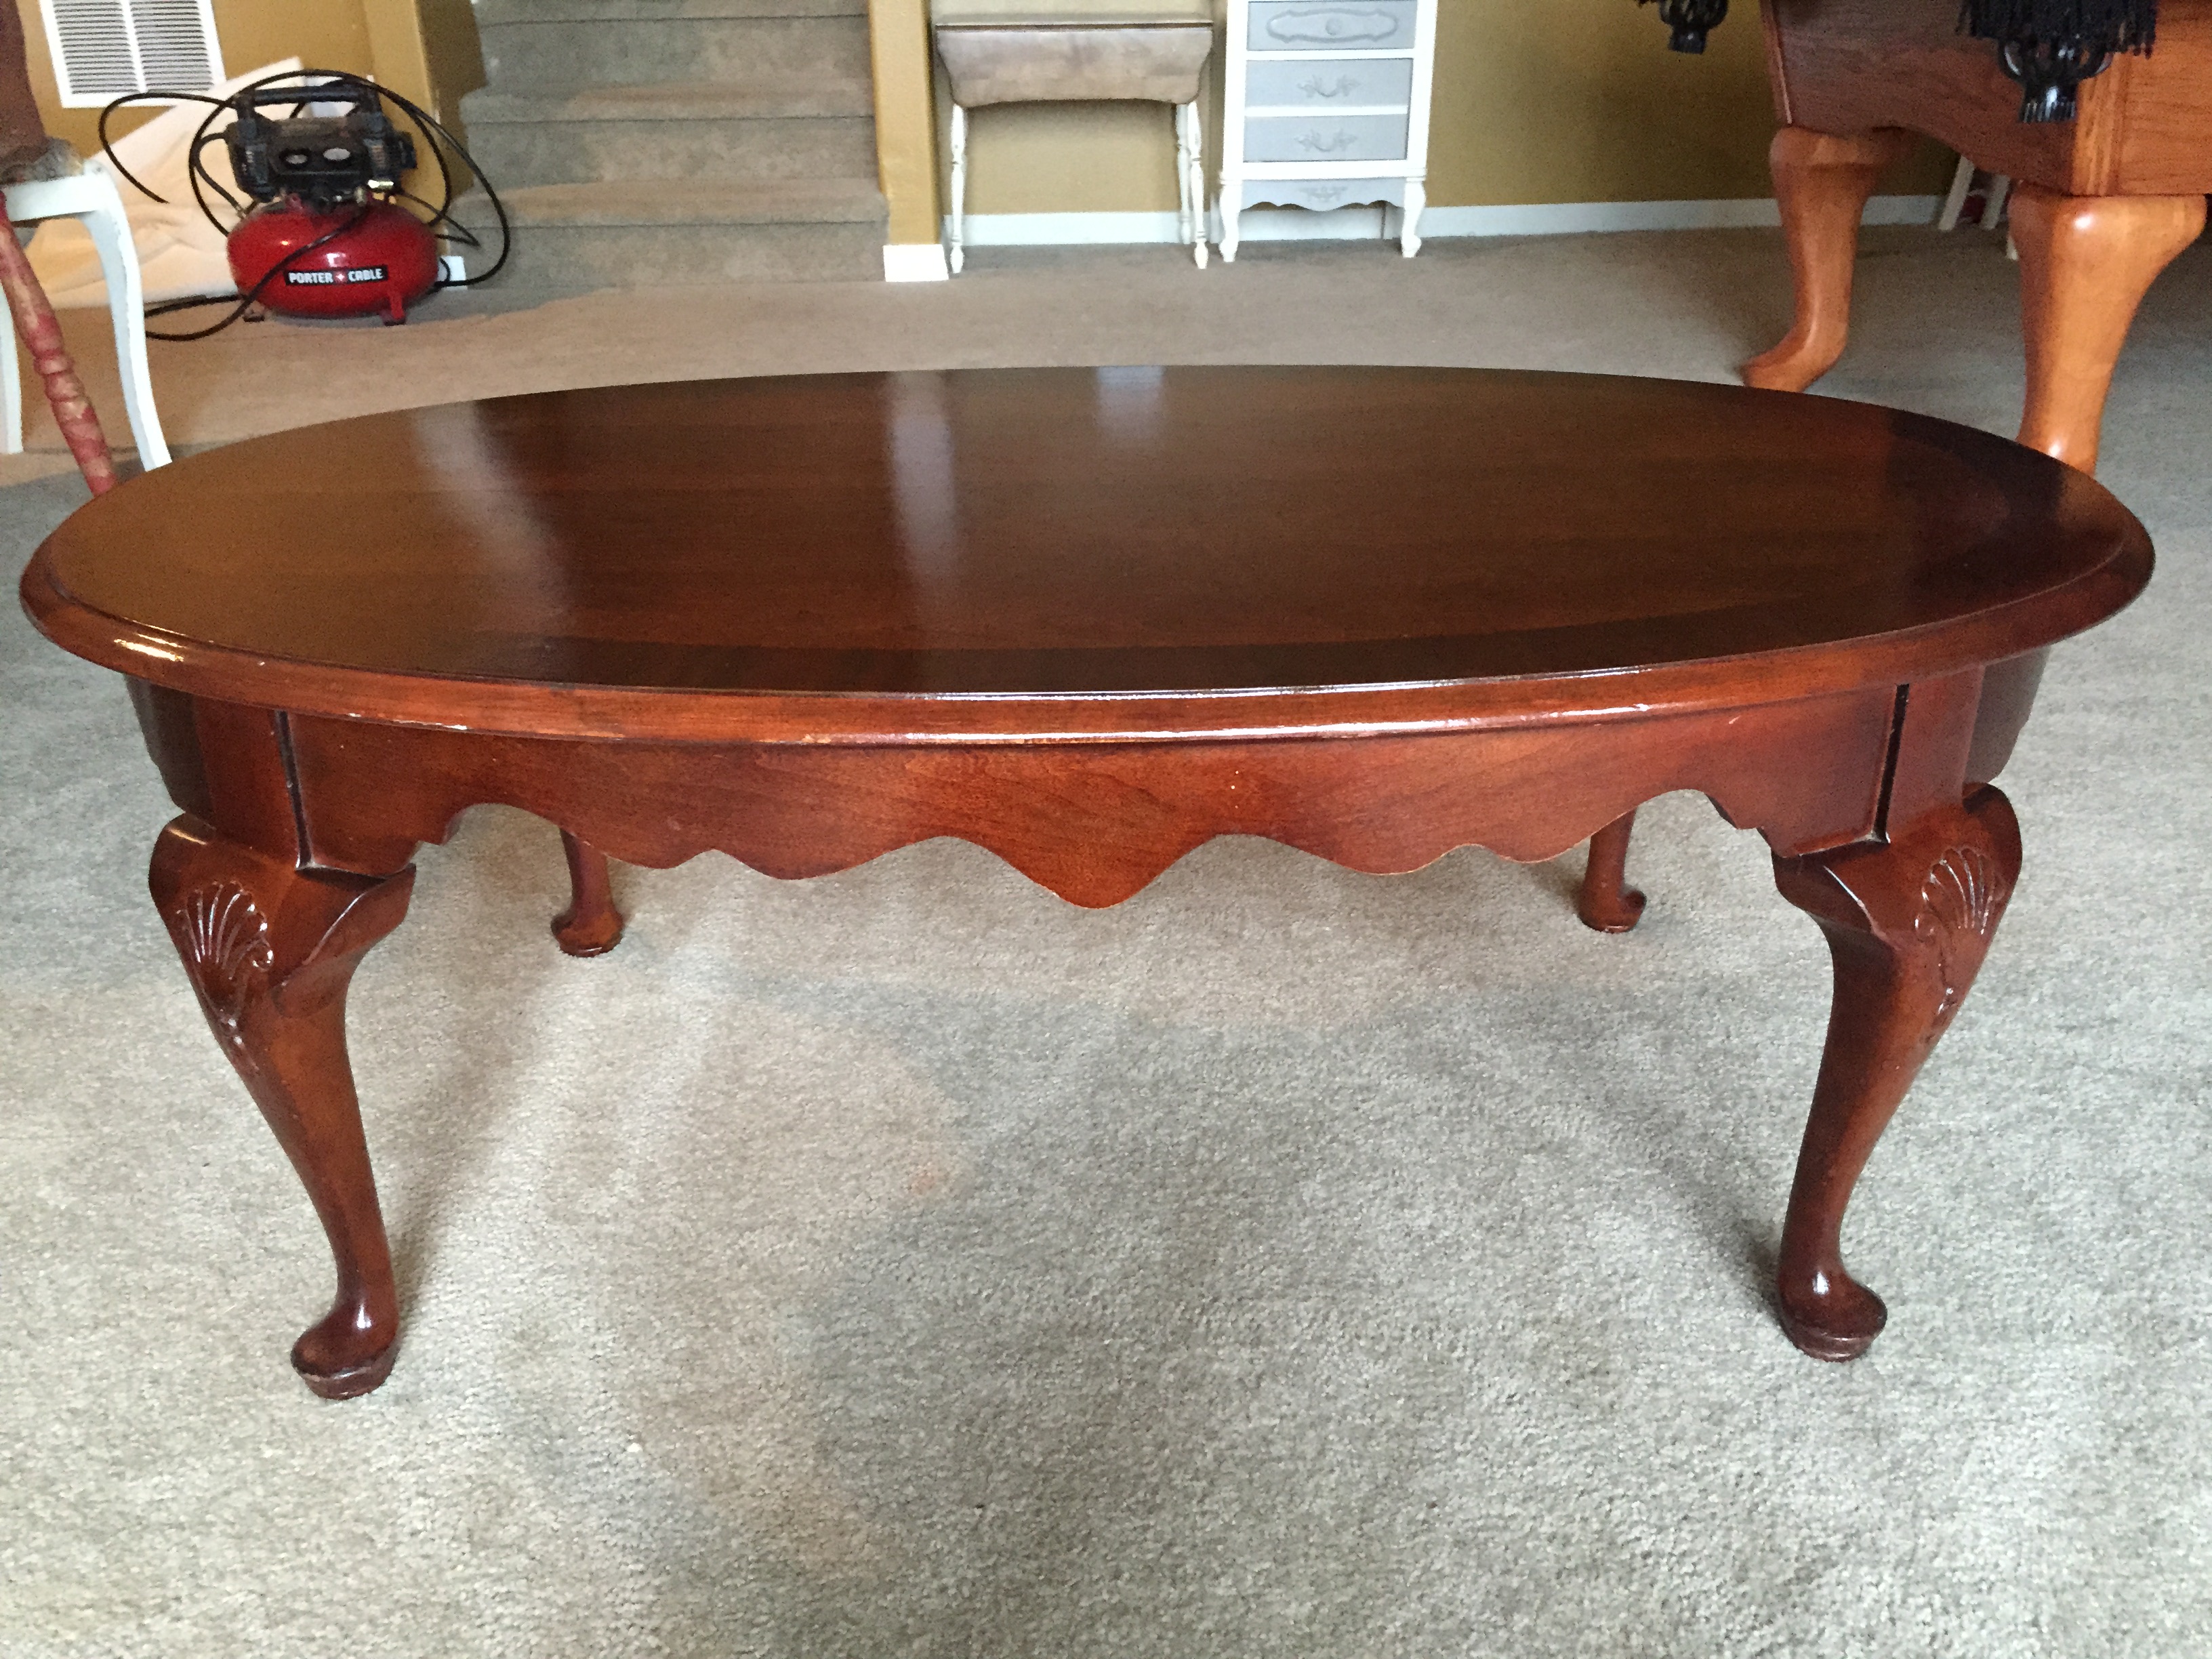 queen anne style cherry coffee table design ideas img end makeover refinished one trash another small marble top accent kohl mobile coupon free standing wine rack cool wood tables